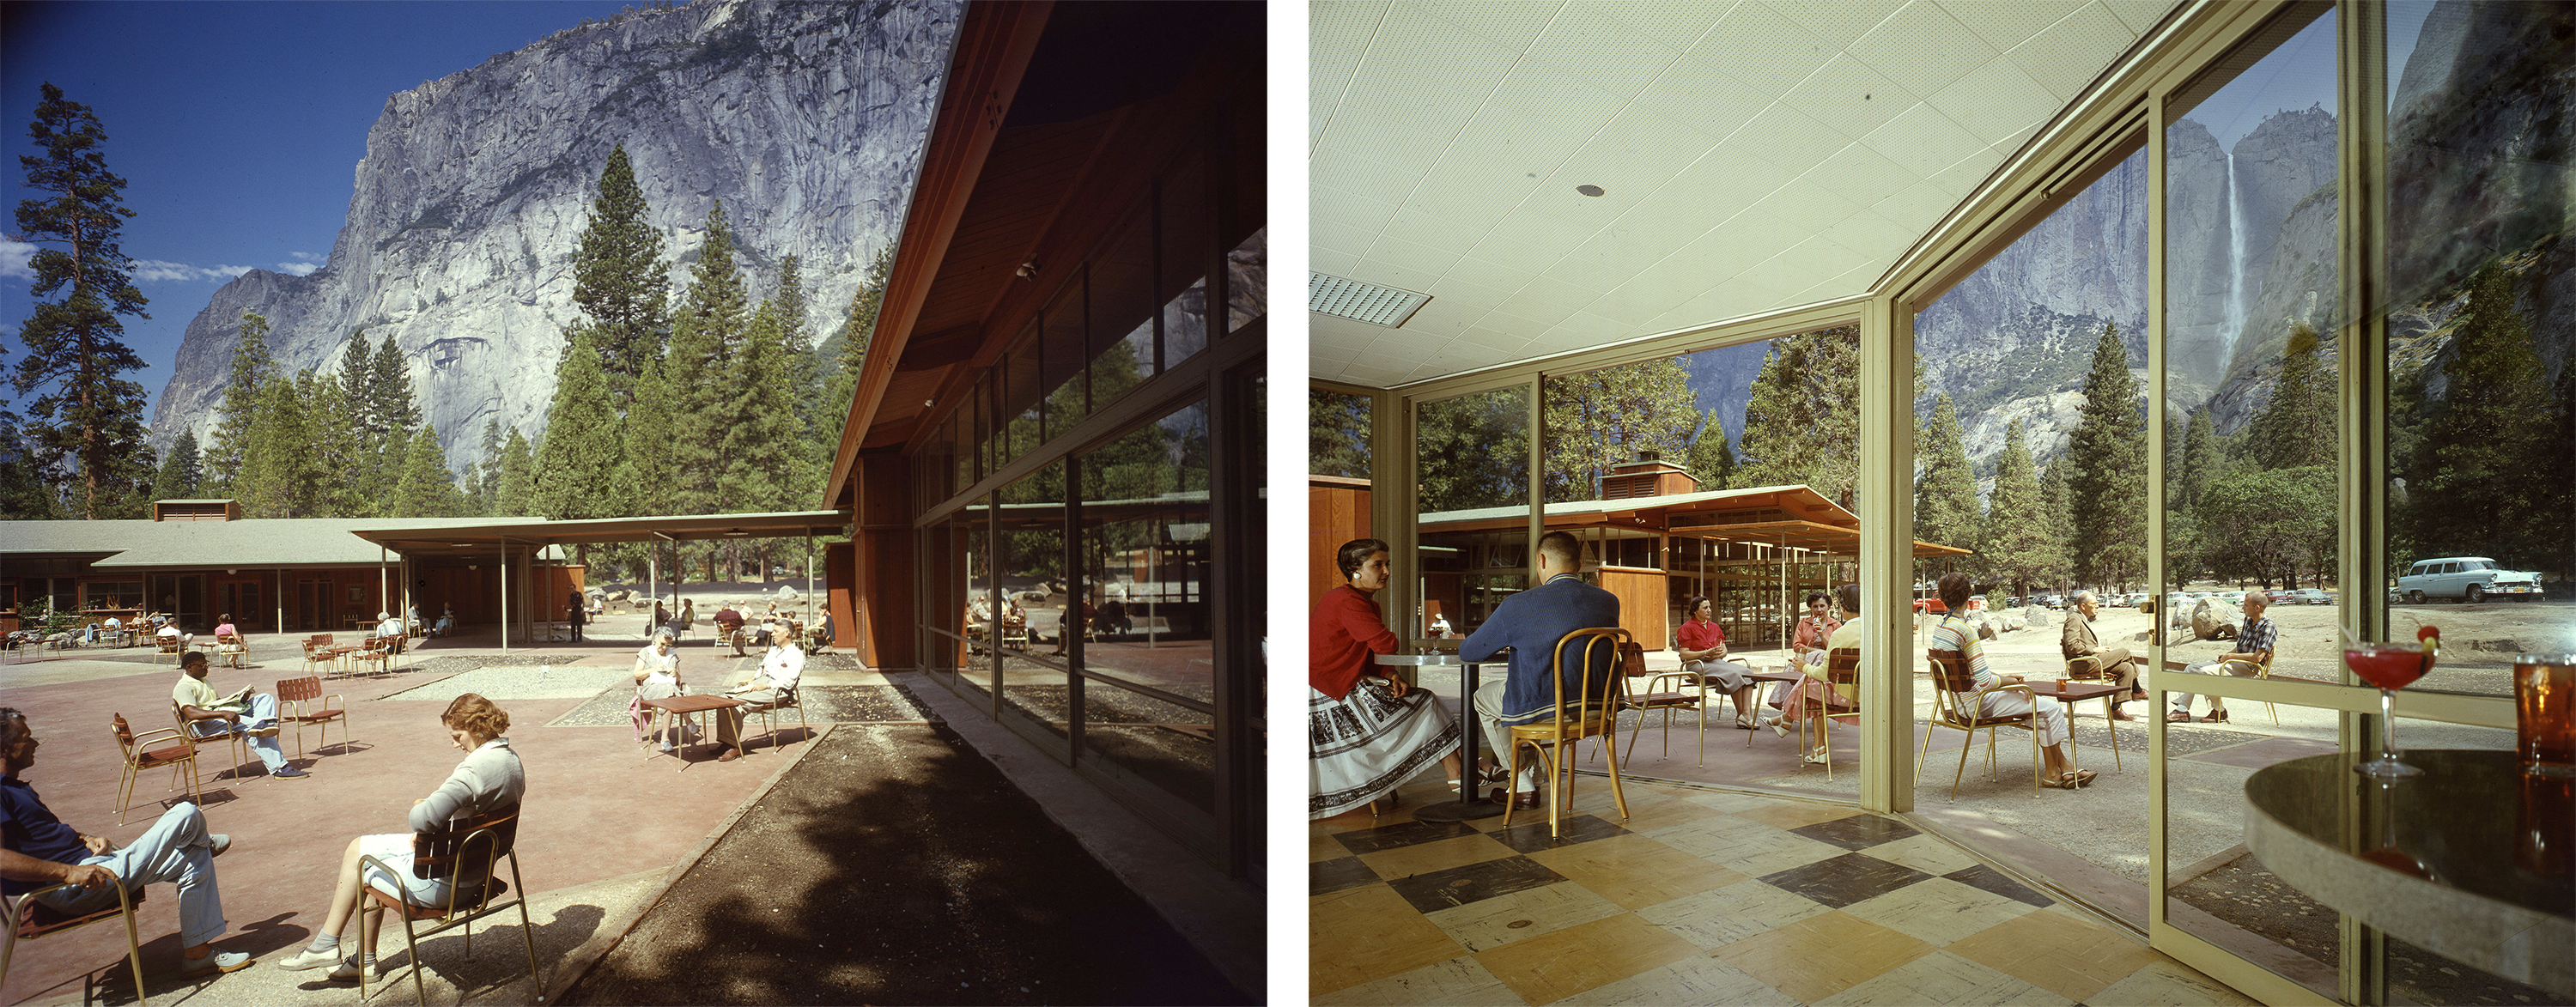 Two images side-by-side showing visitors seated both indoors and outdoors throughout a courtyard and inside a food service building; waterfalls and cliffs tower above